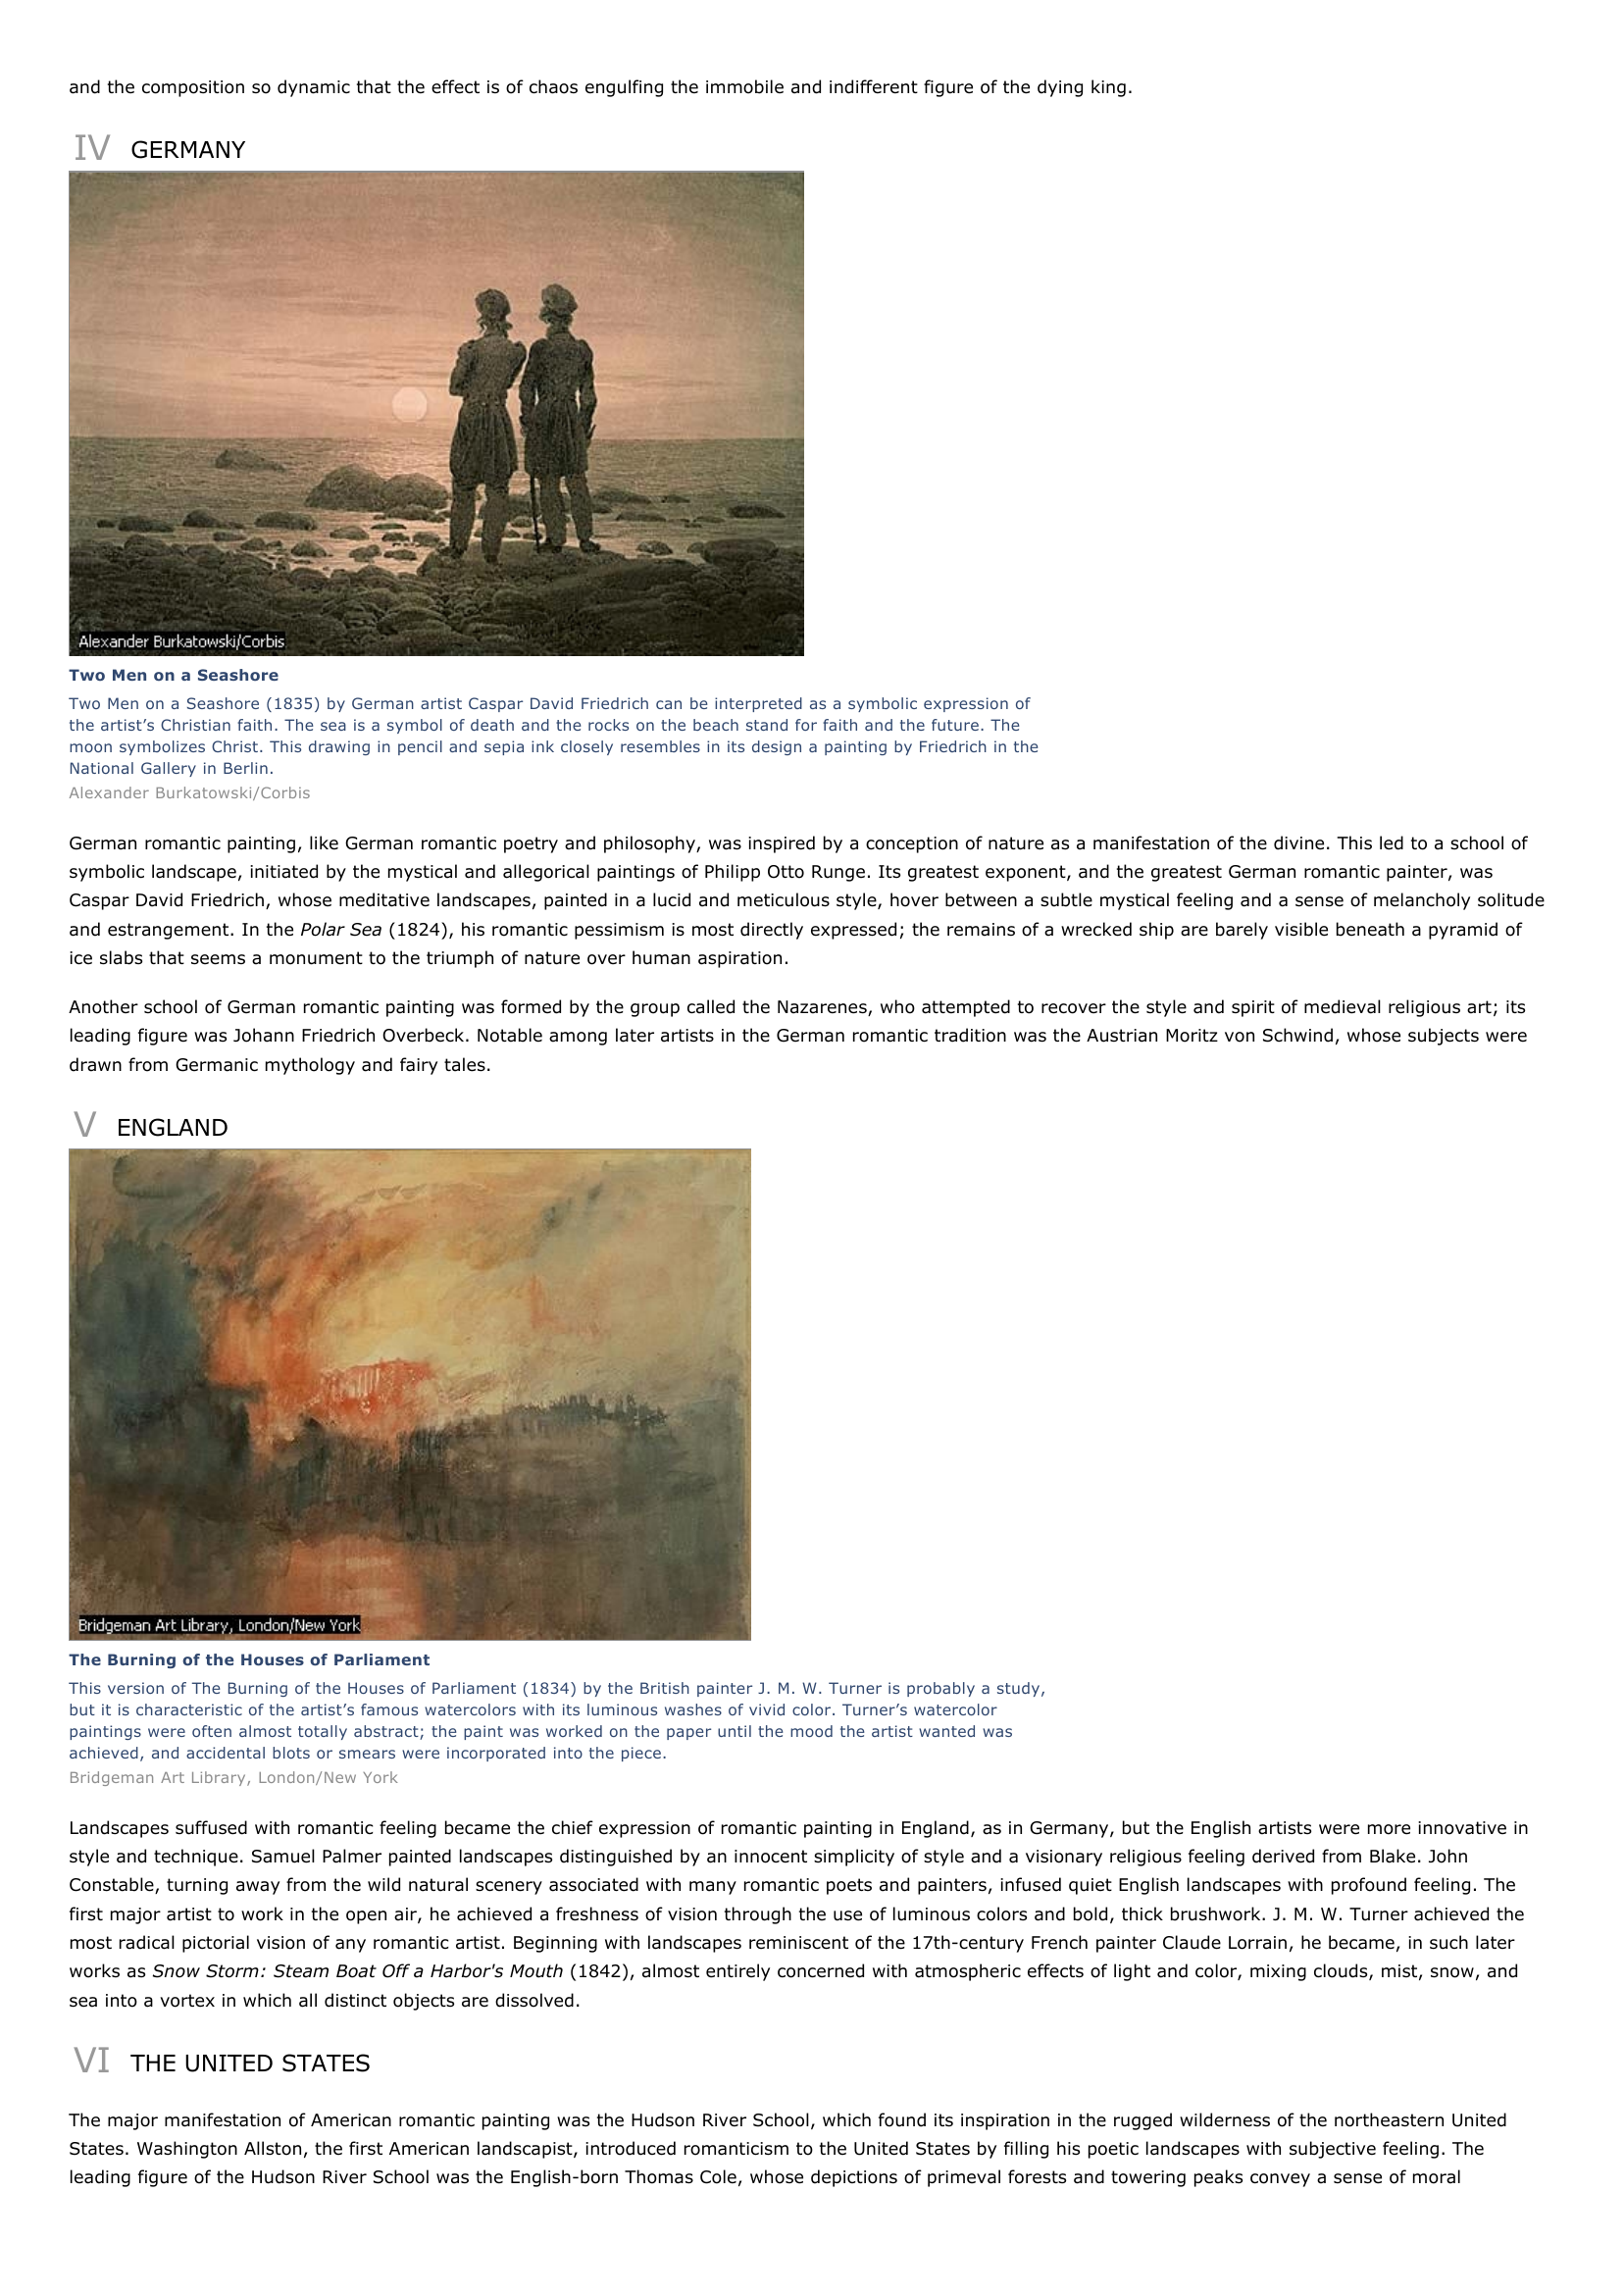 Prévisualisation du document Romanticism
I

INTRODUCTION

Romanticism, in art, European and American movement extending from about 1800 to 1850.